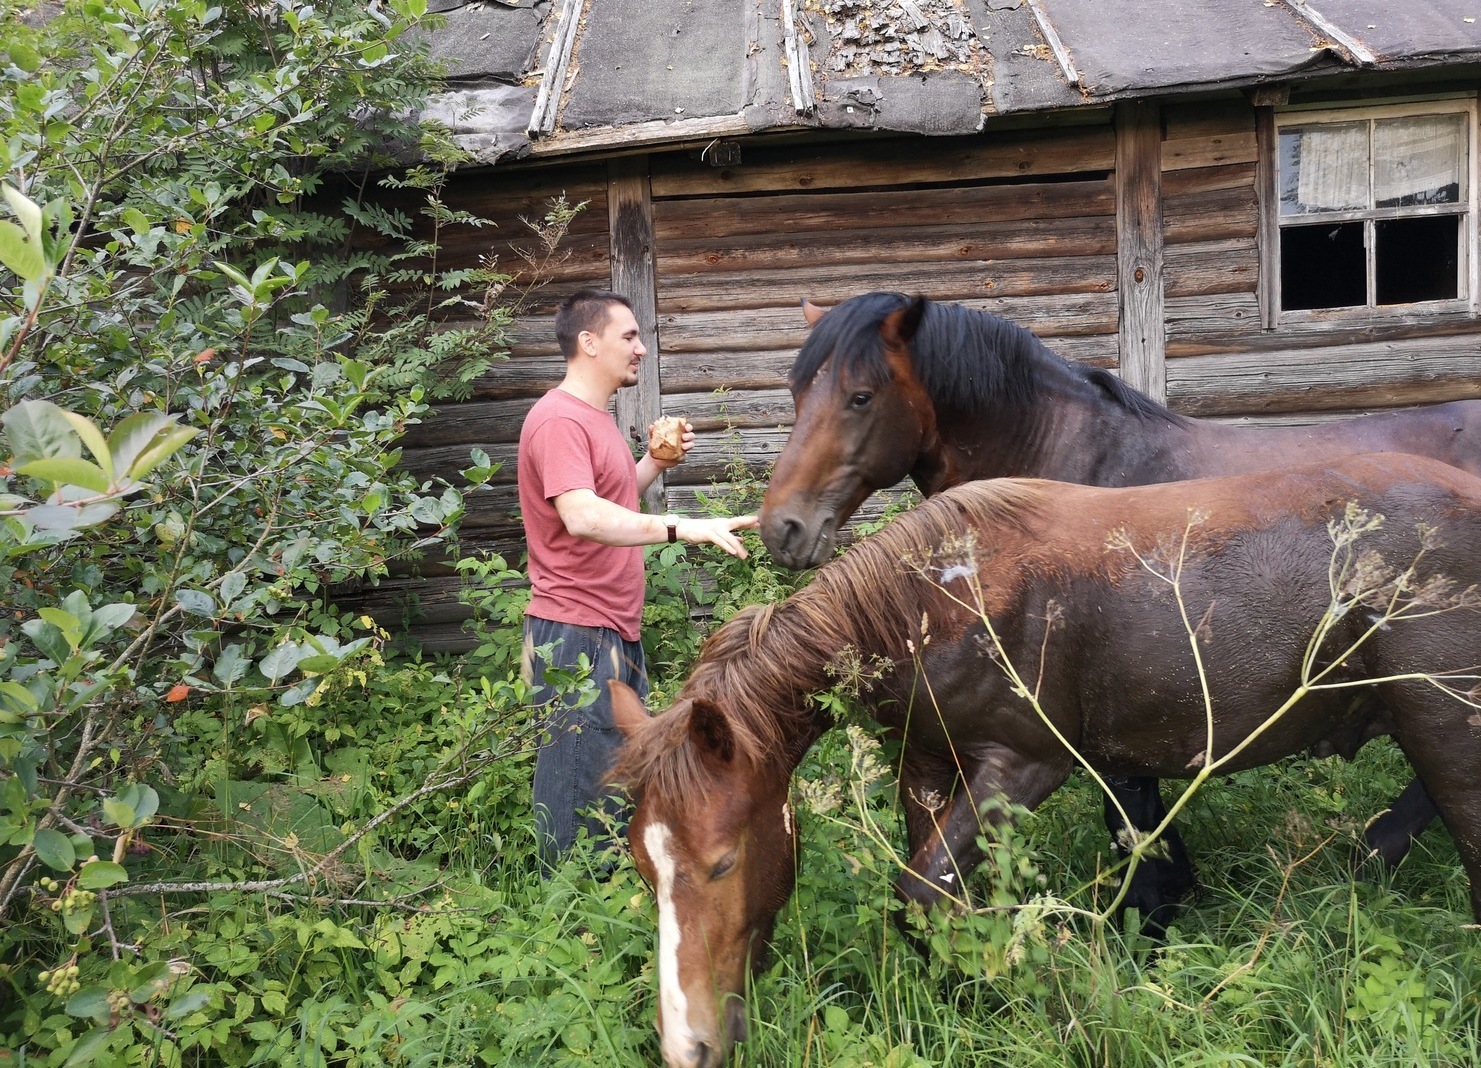 Horses in the rural Russia